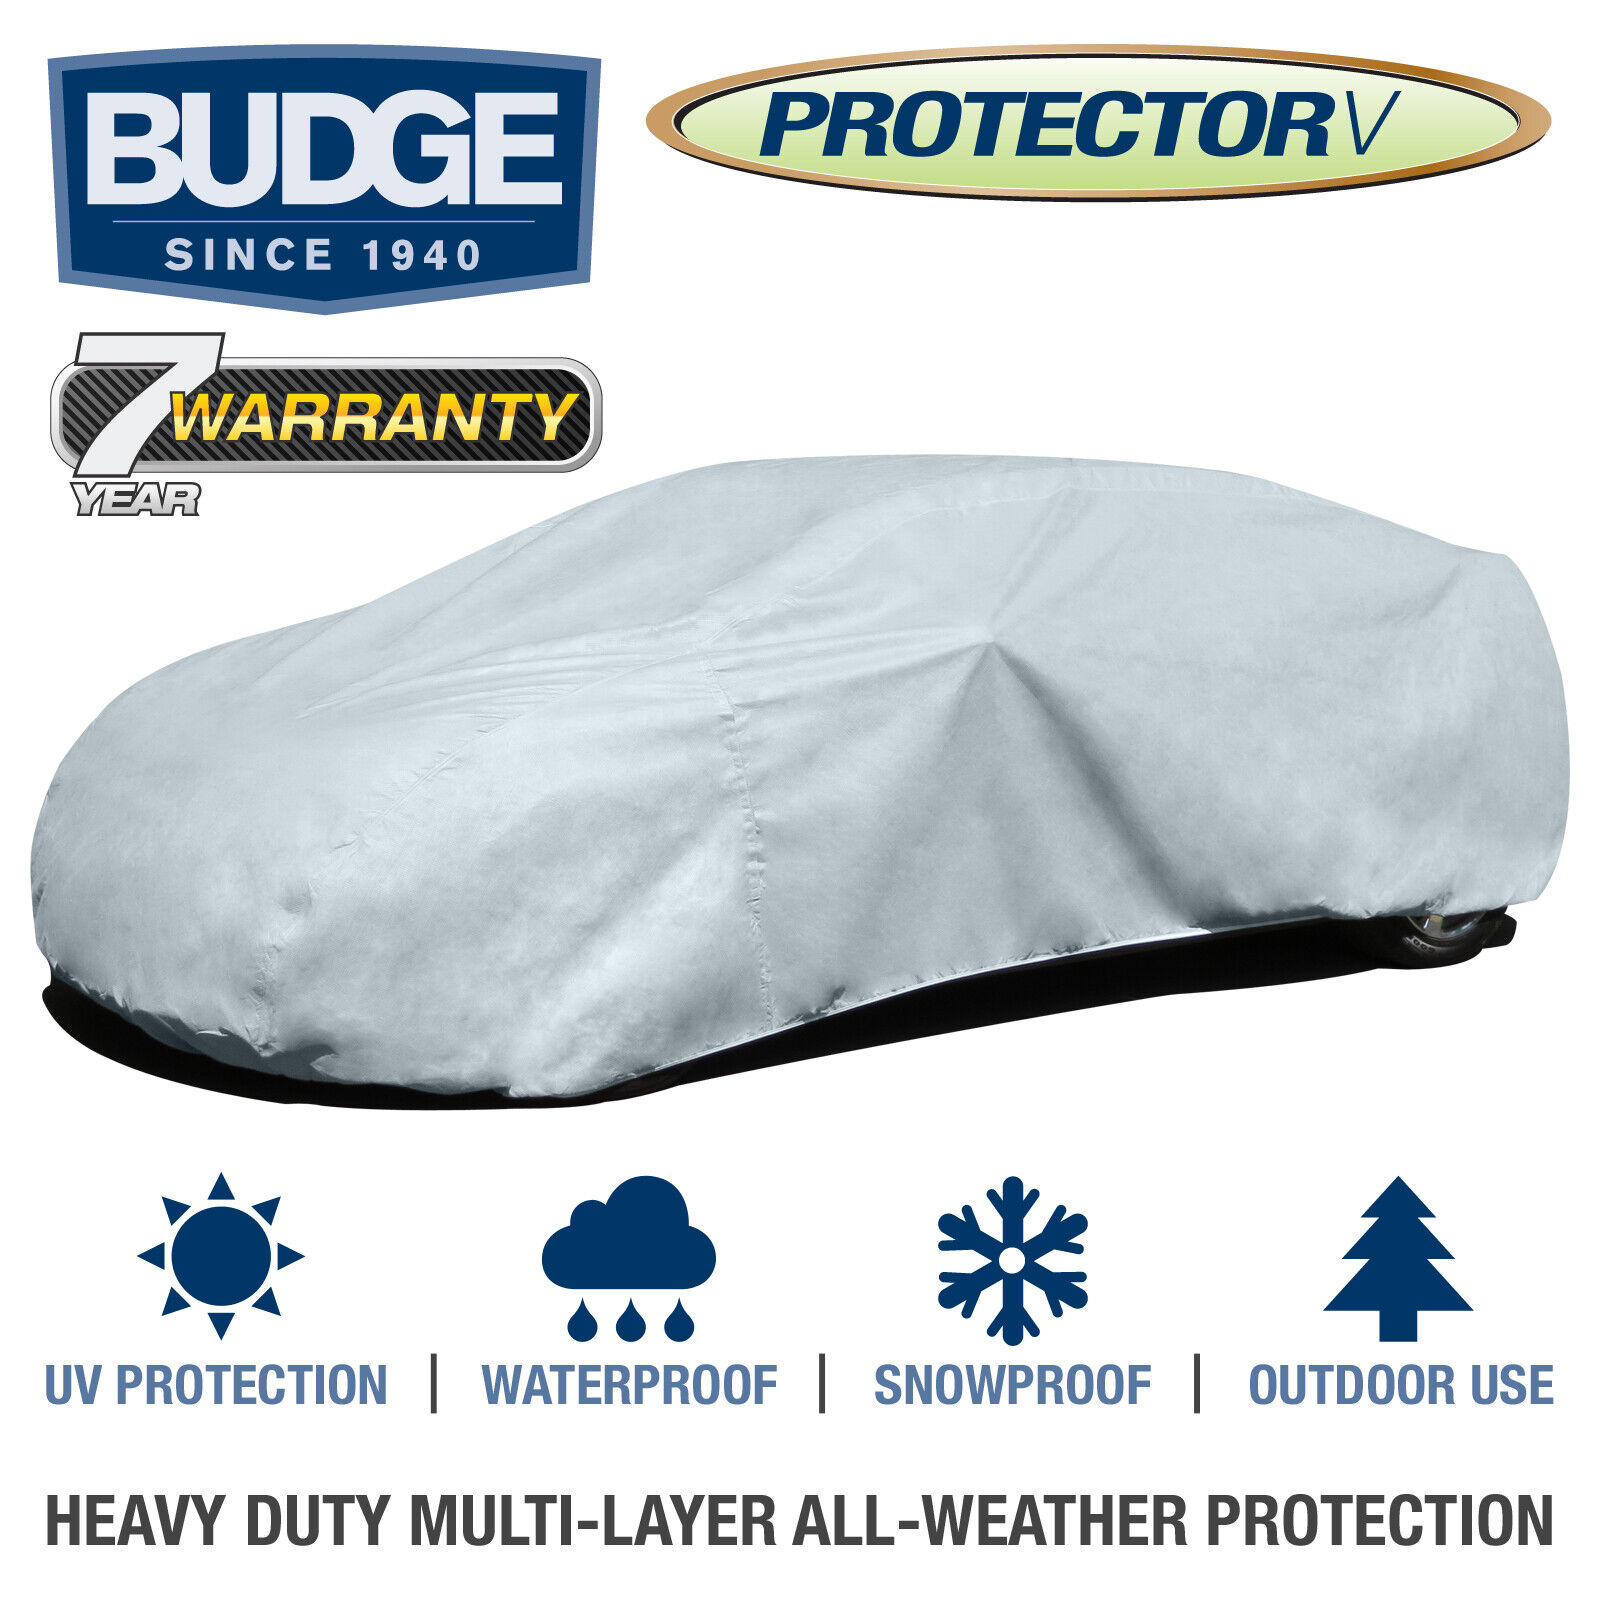 Budge Protector V Car Cover Fits Cars up to 13'1